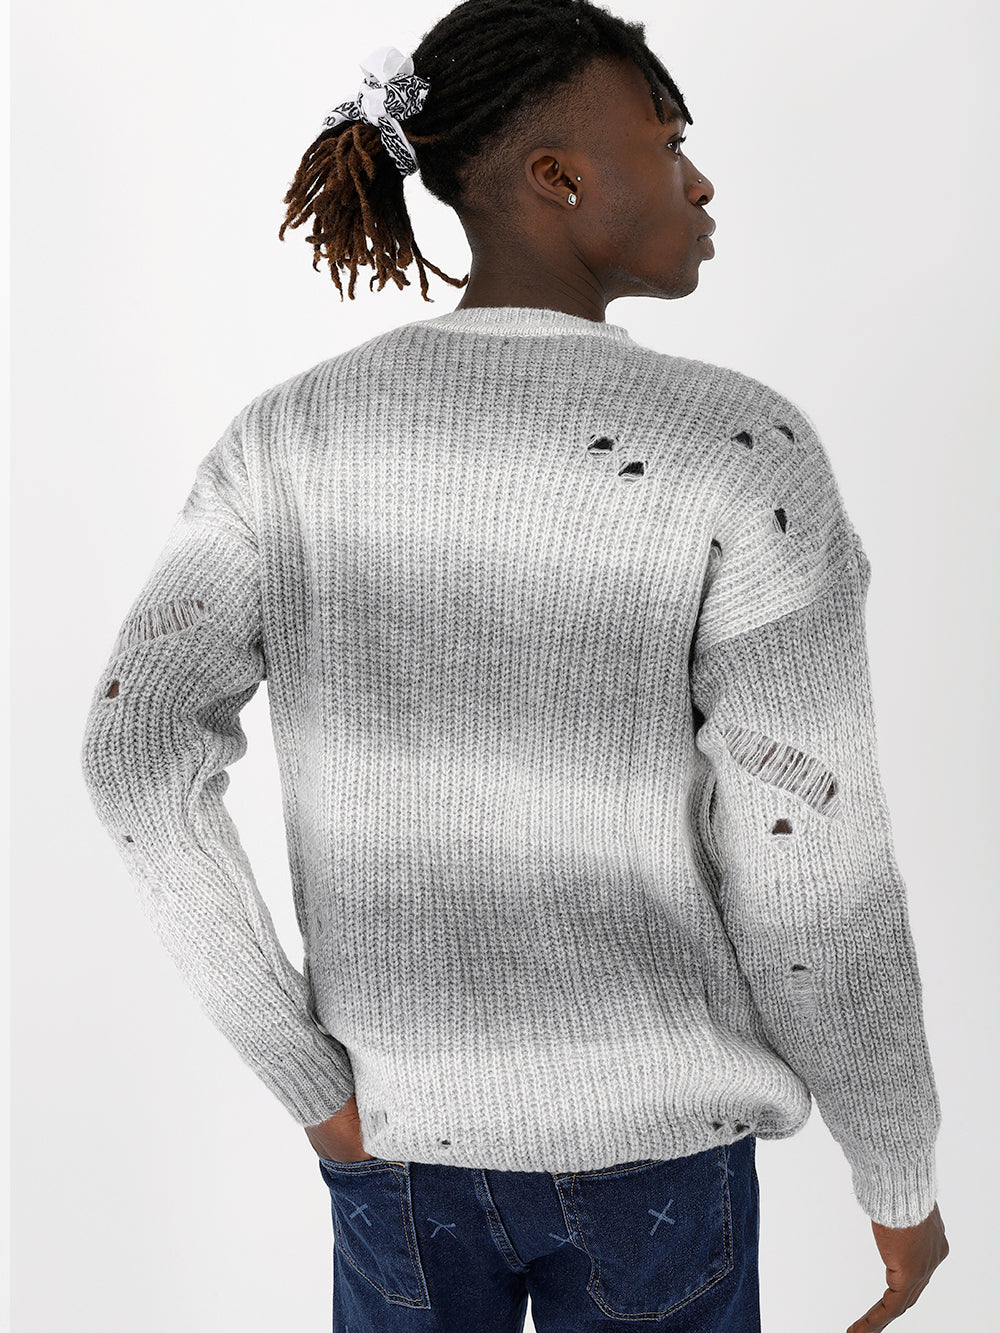 The back view of a man wearing a DISTRESSED GENTLEMAN SWEATER | WHITE-GRAY with holes.